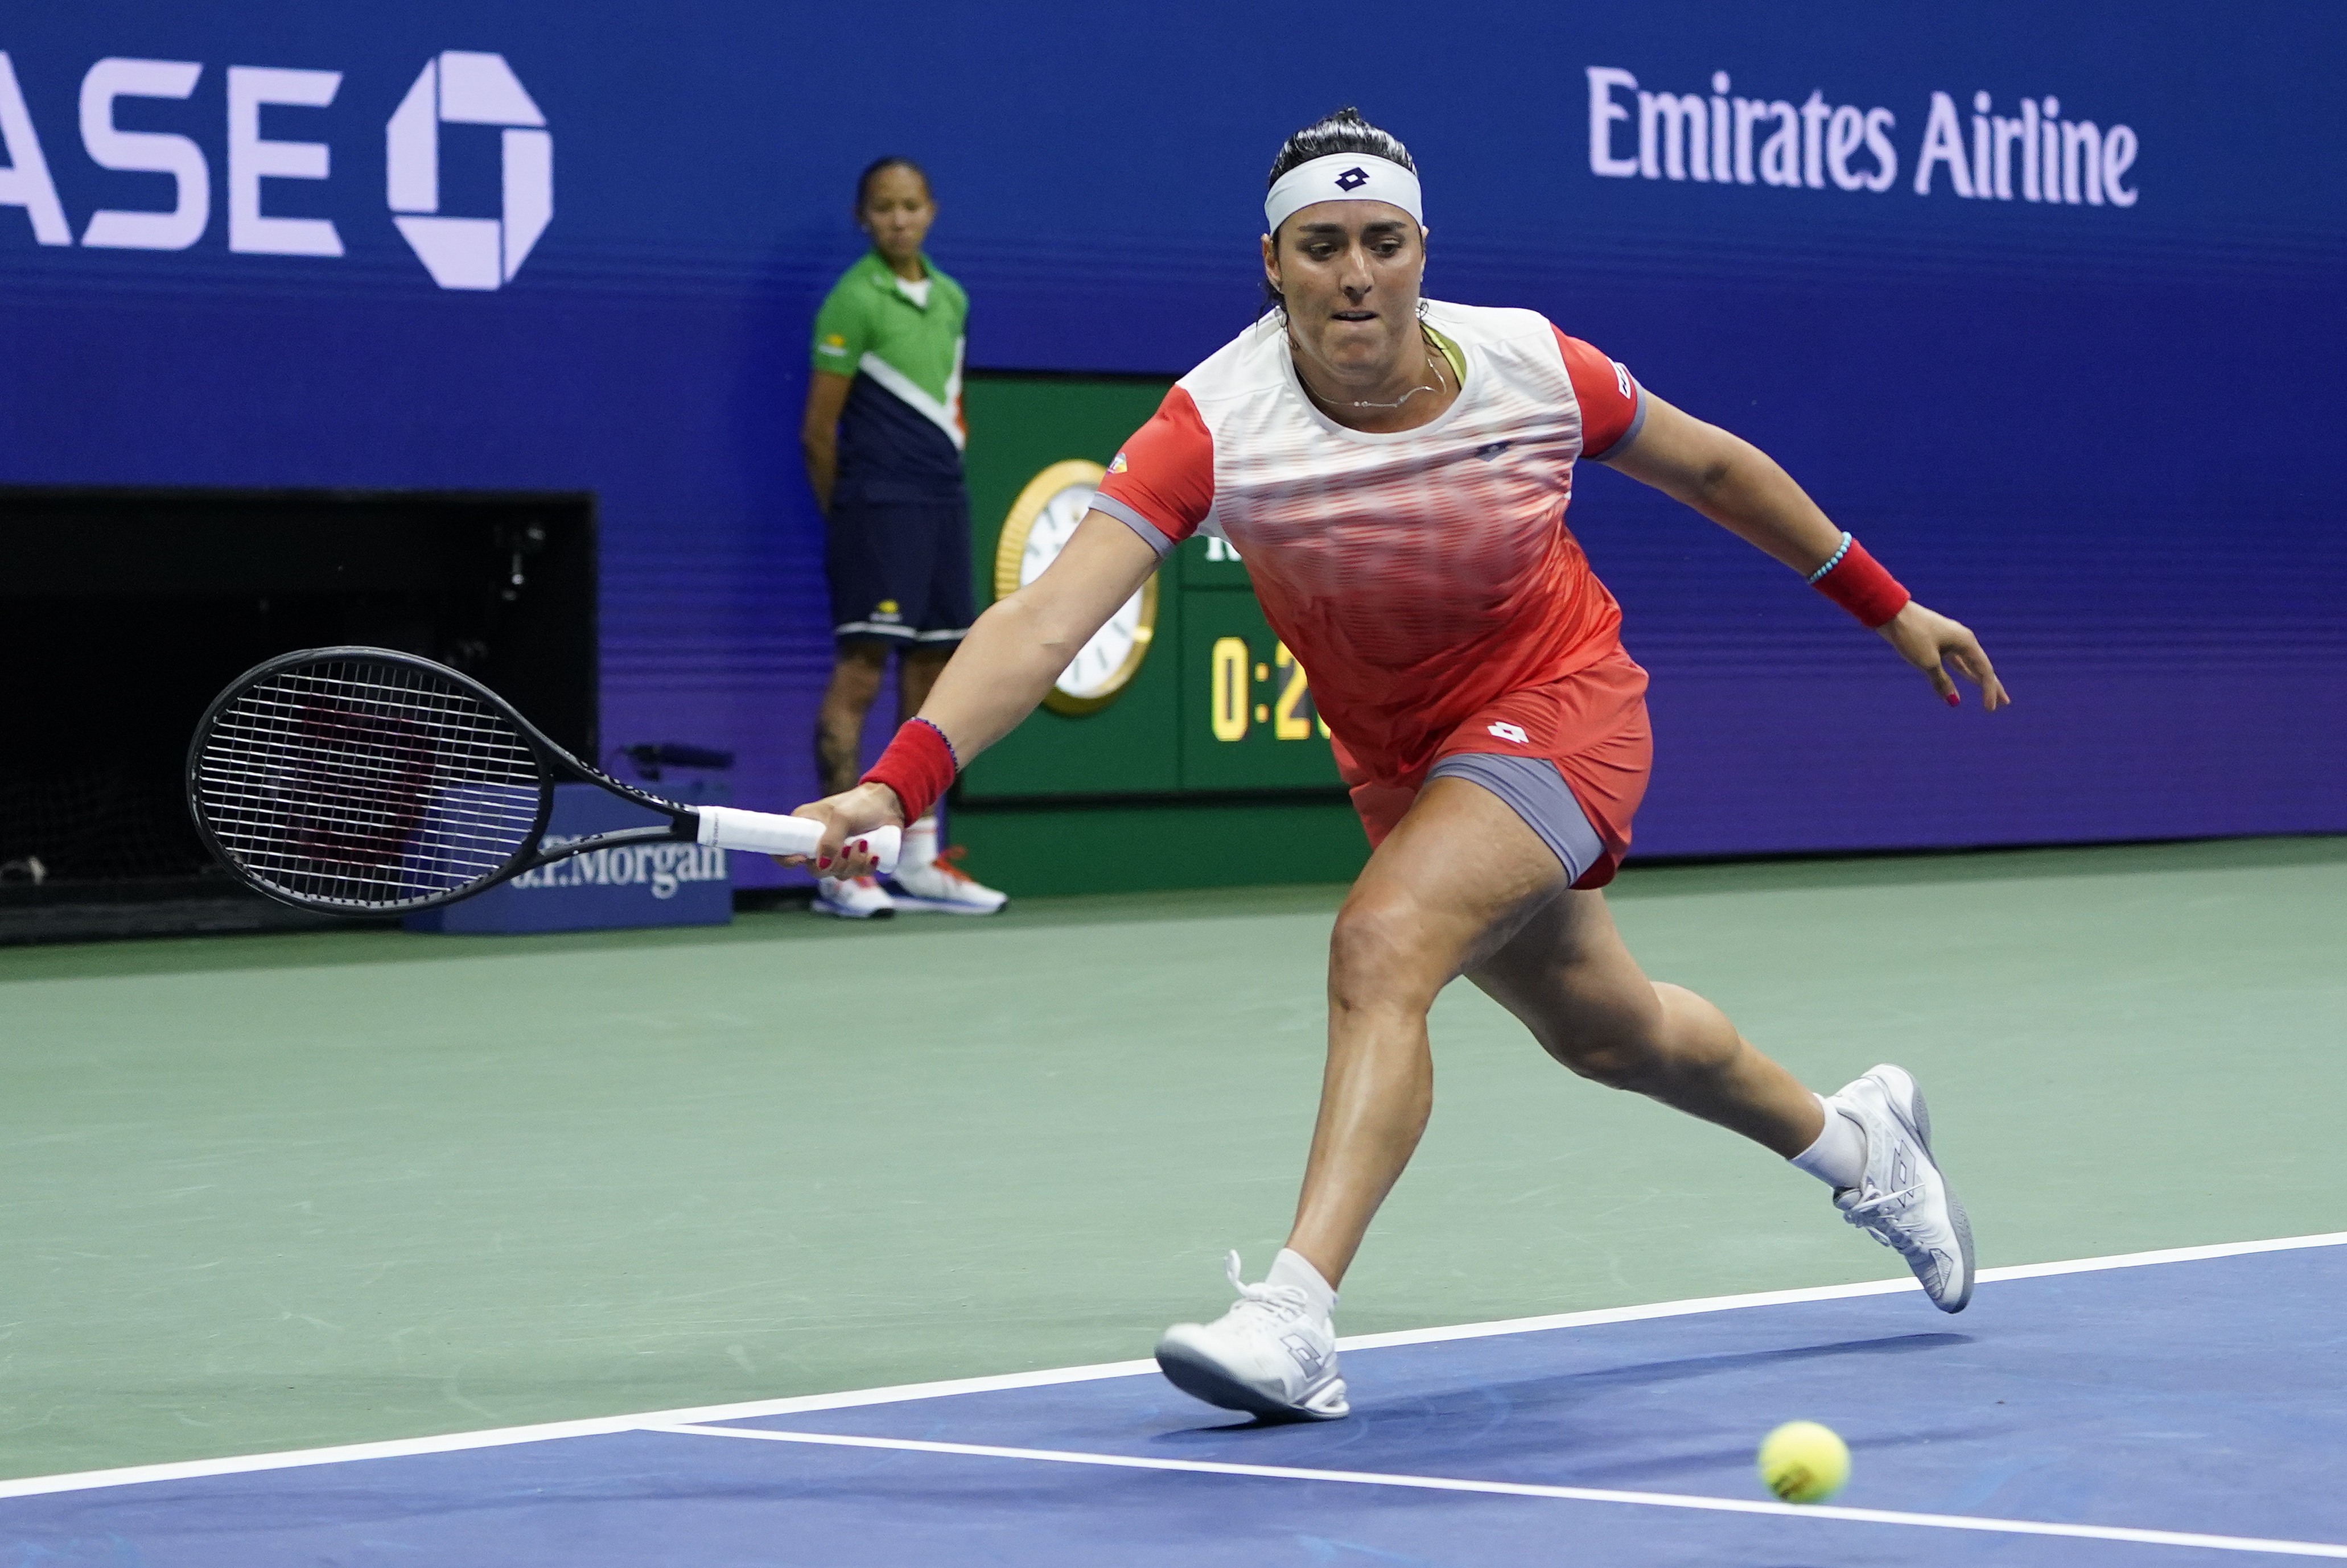 Ons Jabeur, of Tunisia, returns a shot to Caroline Garcia, of France, during the semifinals of the U.S. Open tennis championships, Thursday, Sept. 8, 2022, in New York. (AP Photo/John Minchillo)